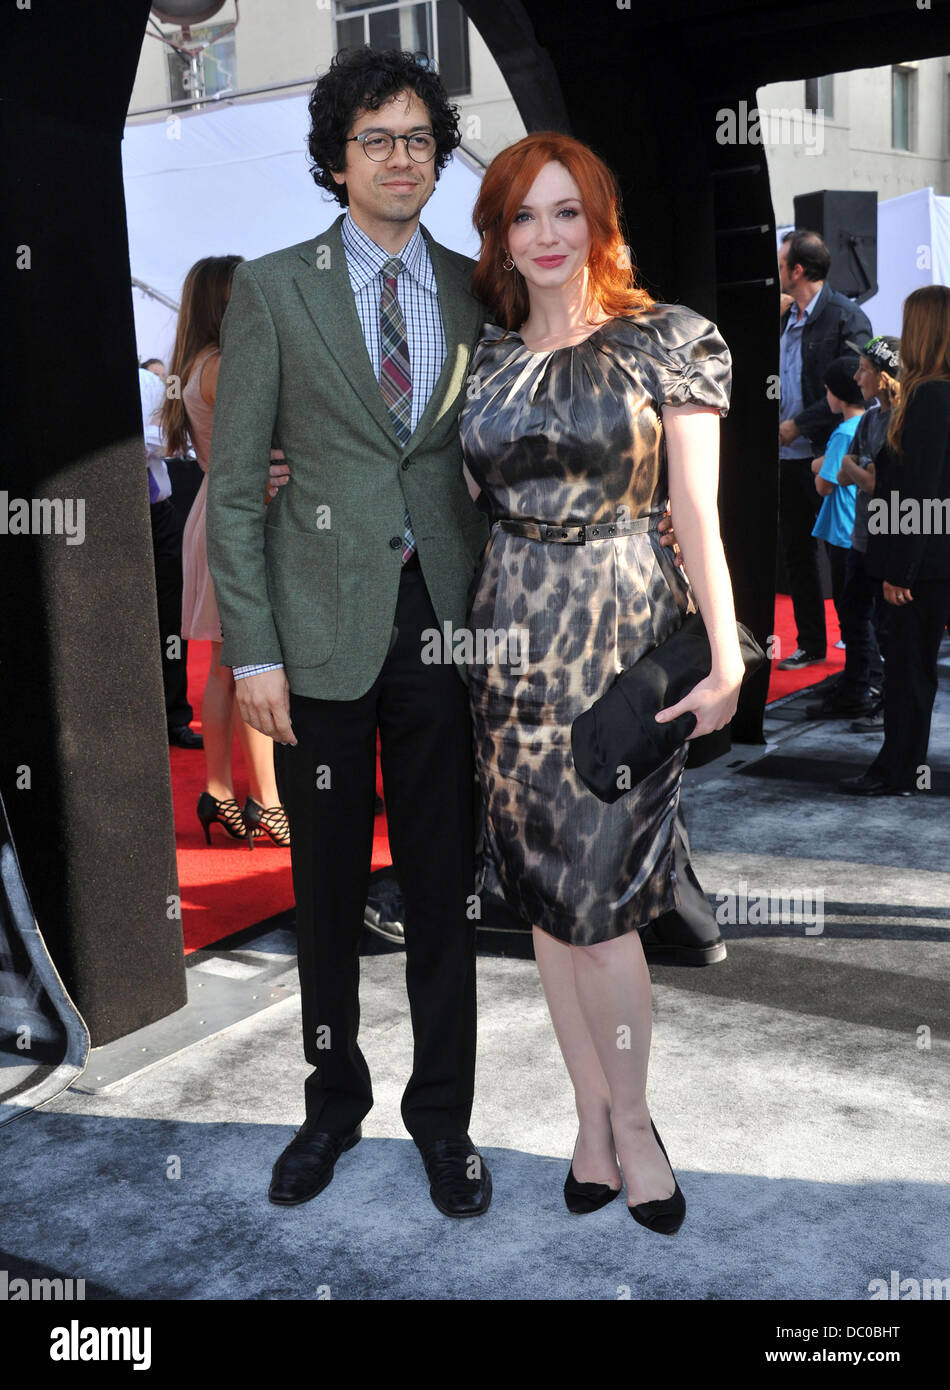 Christina Hendricks and Geoffrey Arend The Cirque Du Soleil world premiere of 'Iris: A Journey Into The World Of Cinema' held at the Kodak Theatre Los Angeles, California - 25.09.11 Stock Photo